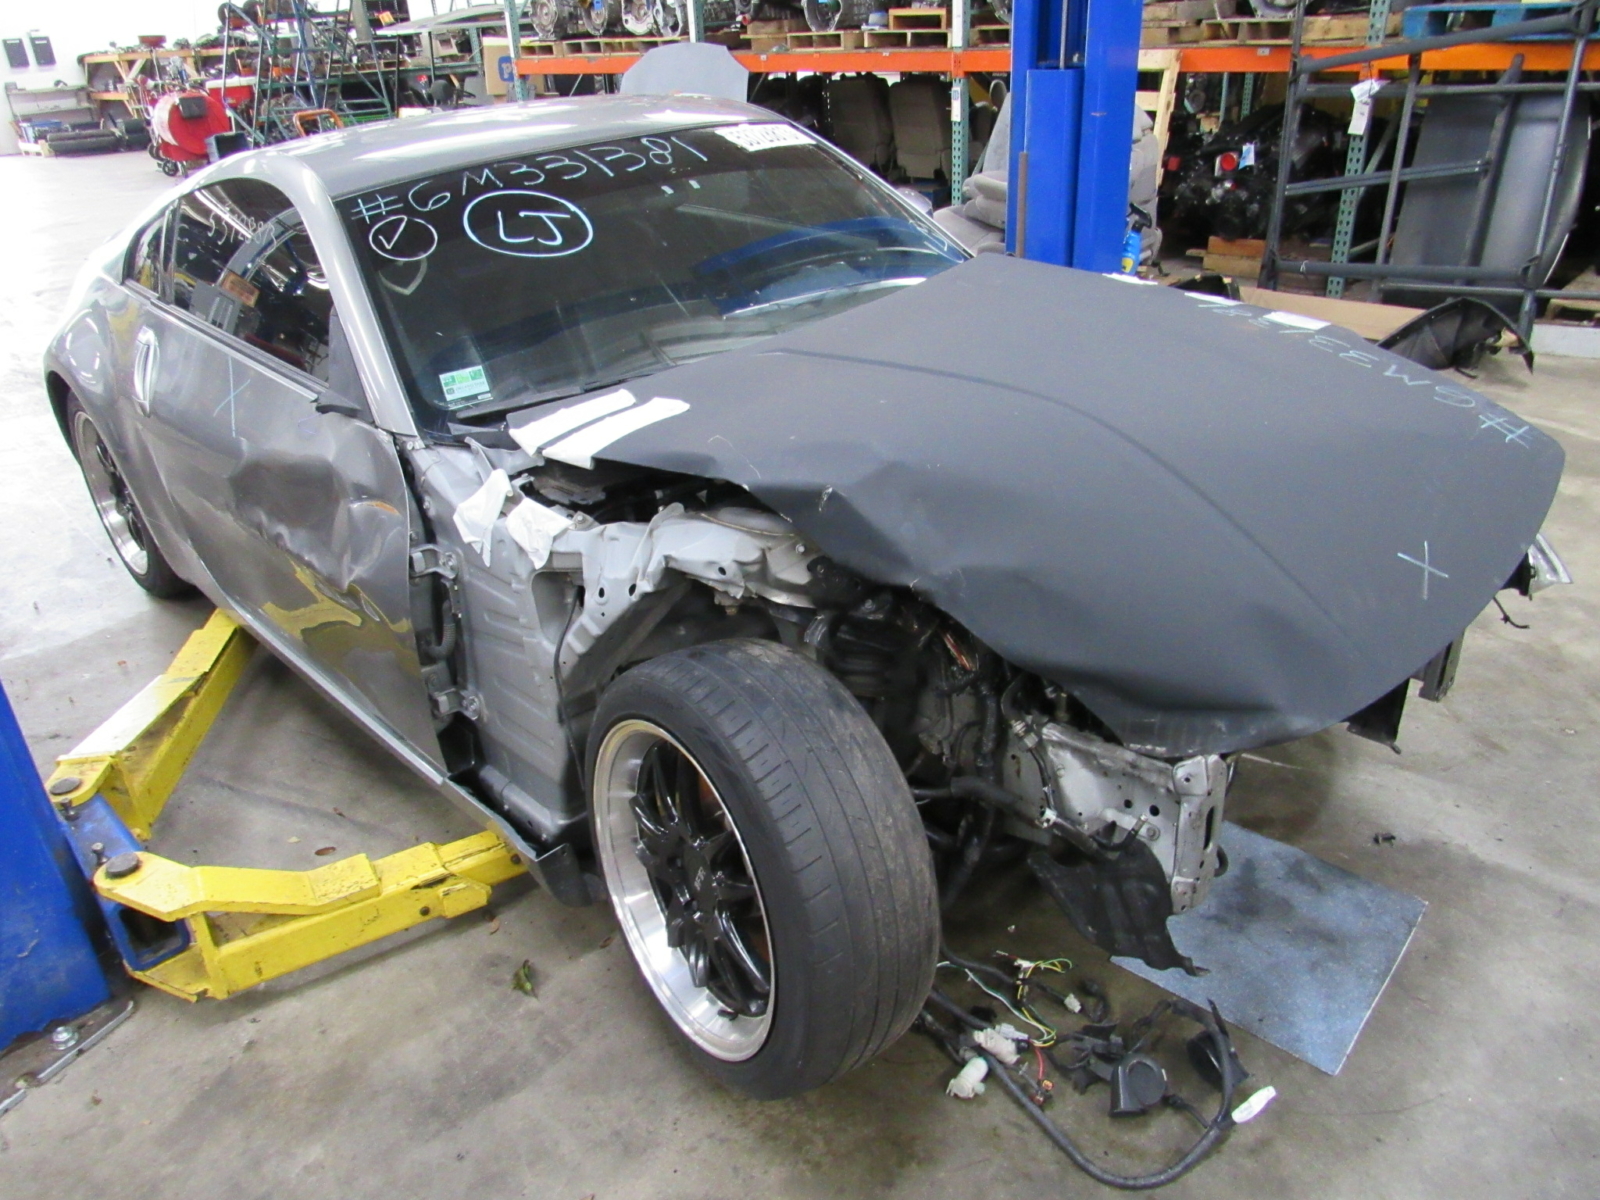 2006 Nissan 350z Coupe 133k In for Parts! Runs great! 8-4-23